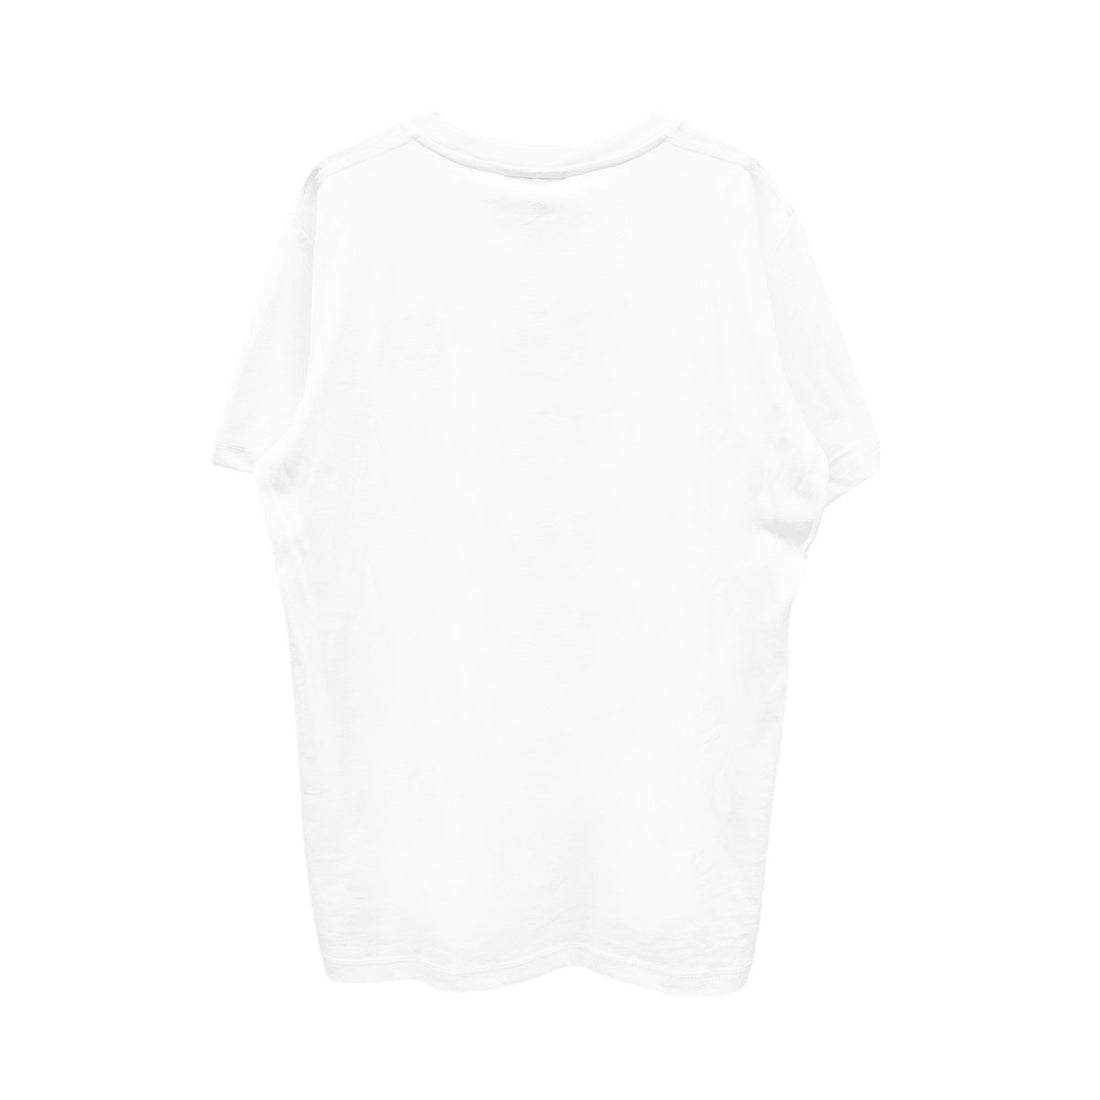 [GANNI]Thin Jersey Loveclub Relaxed T-shirt/WHITE(T3867)